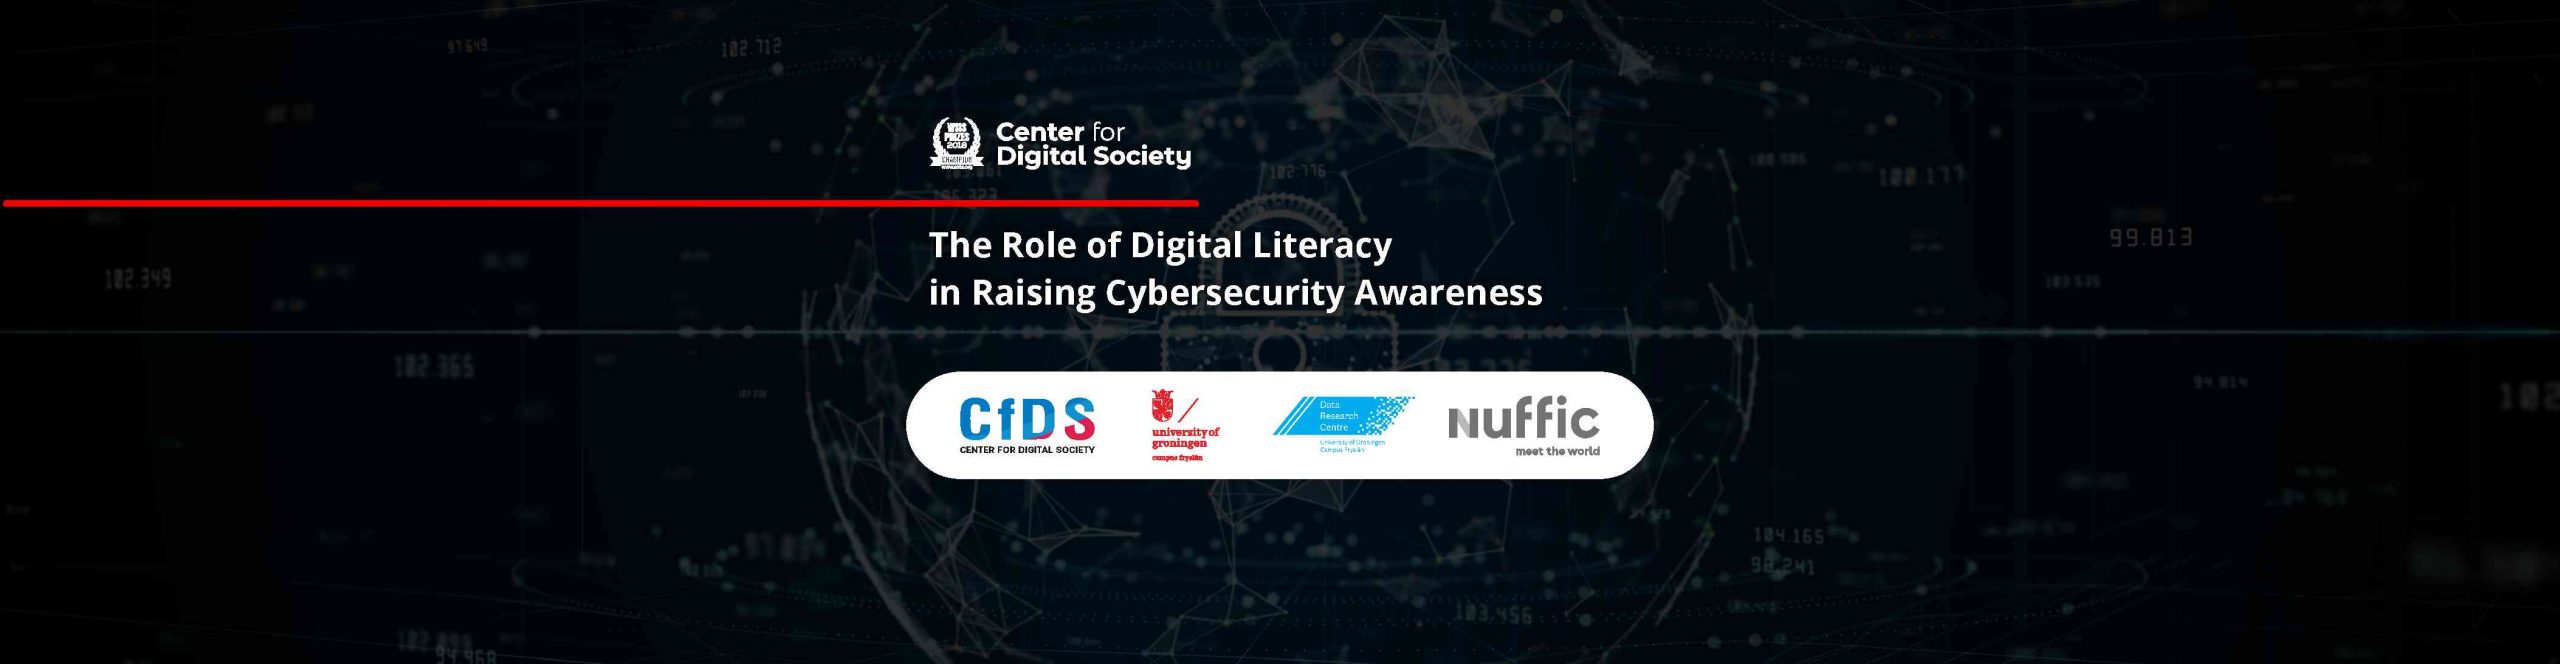 The Role of Digital Literacy in Raising Cybersecurity Awareness